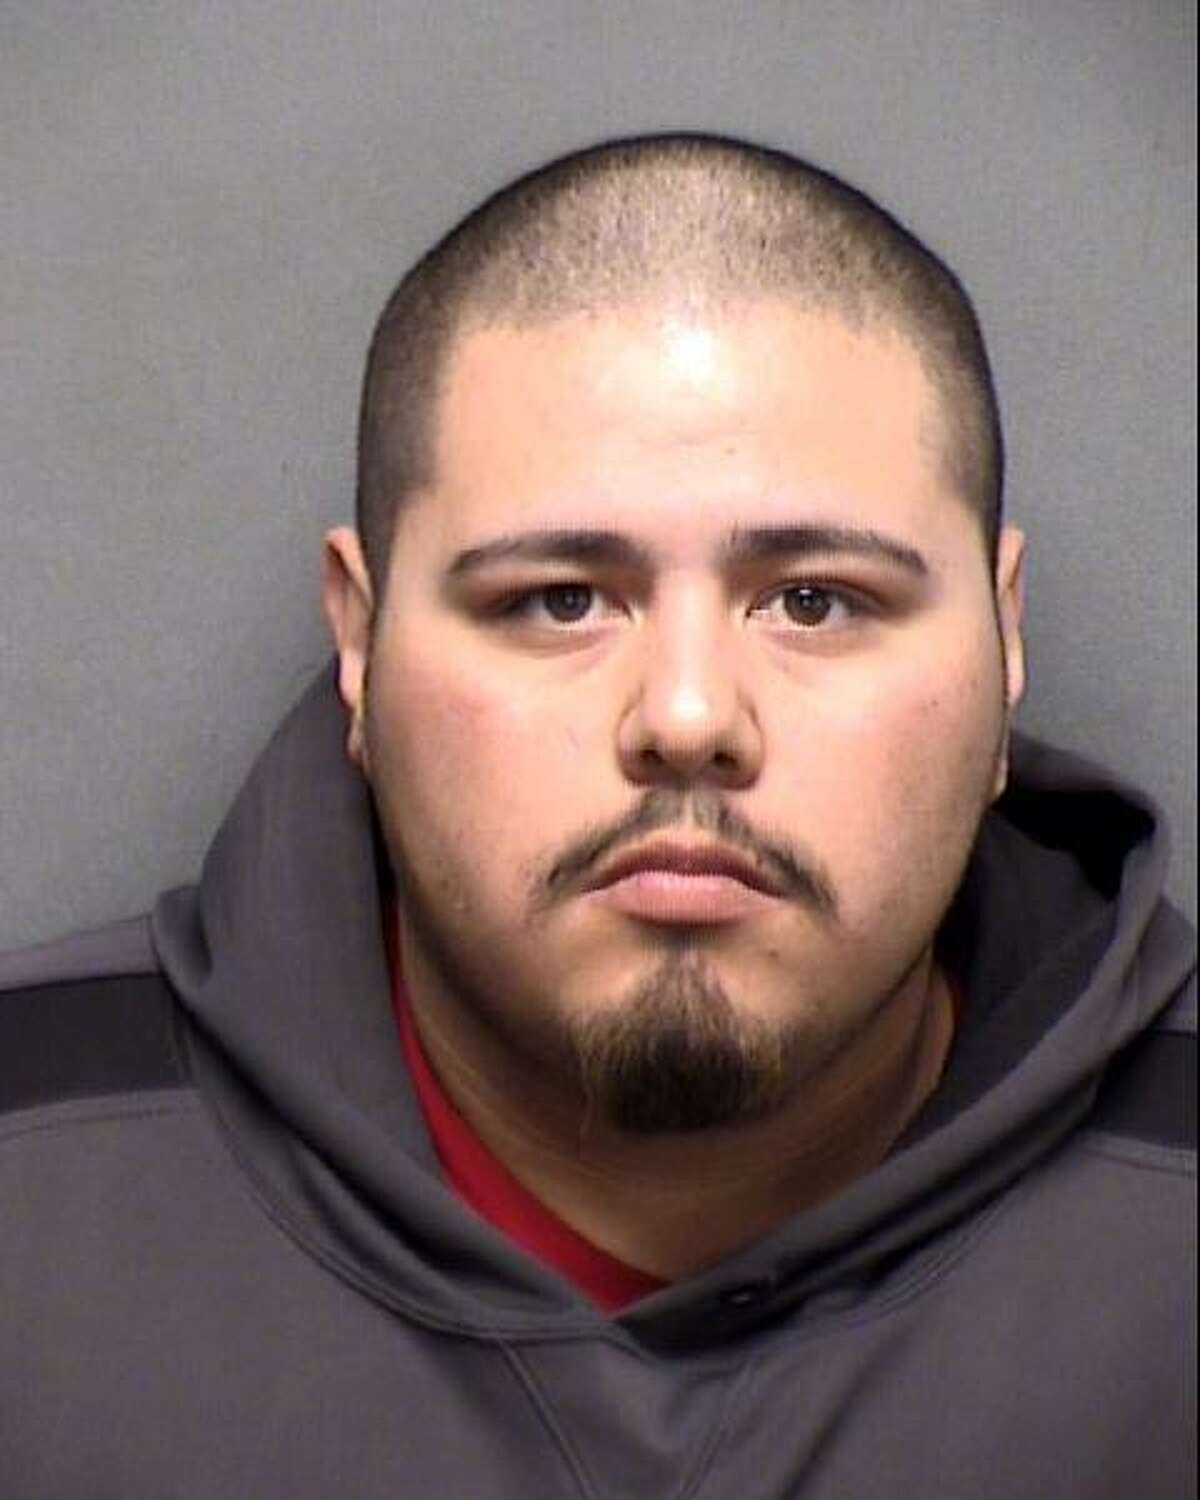 Henry James Montalvo, 28, was arrested Wednesday, Feb. 26, 2020, and charged with aggravated sexual assault of a child. He posted a $75,000 bond and was in the process of being released the same day.